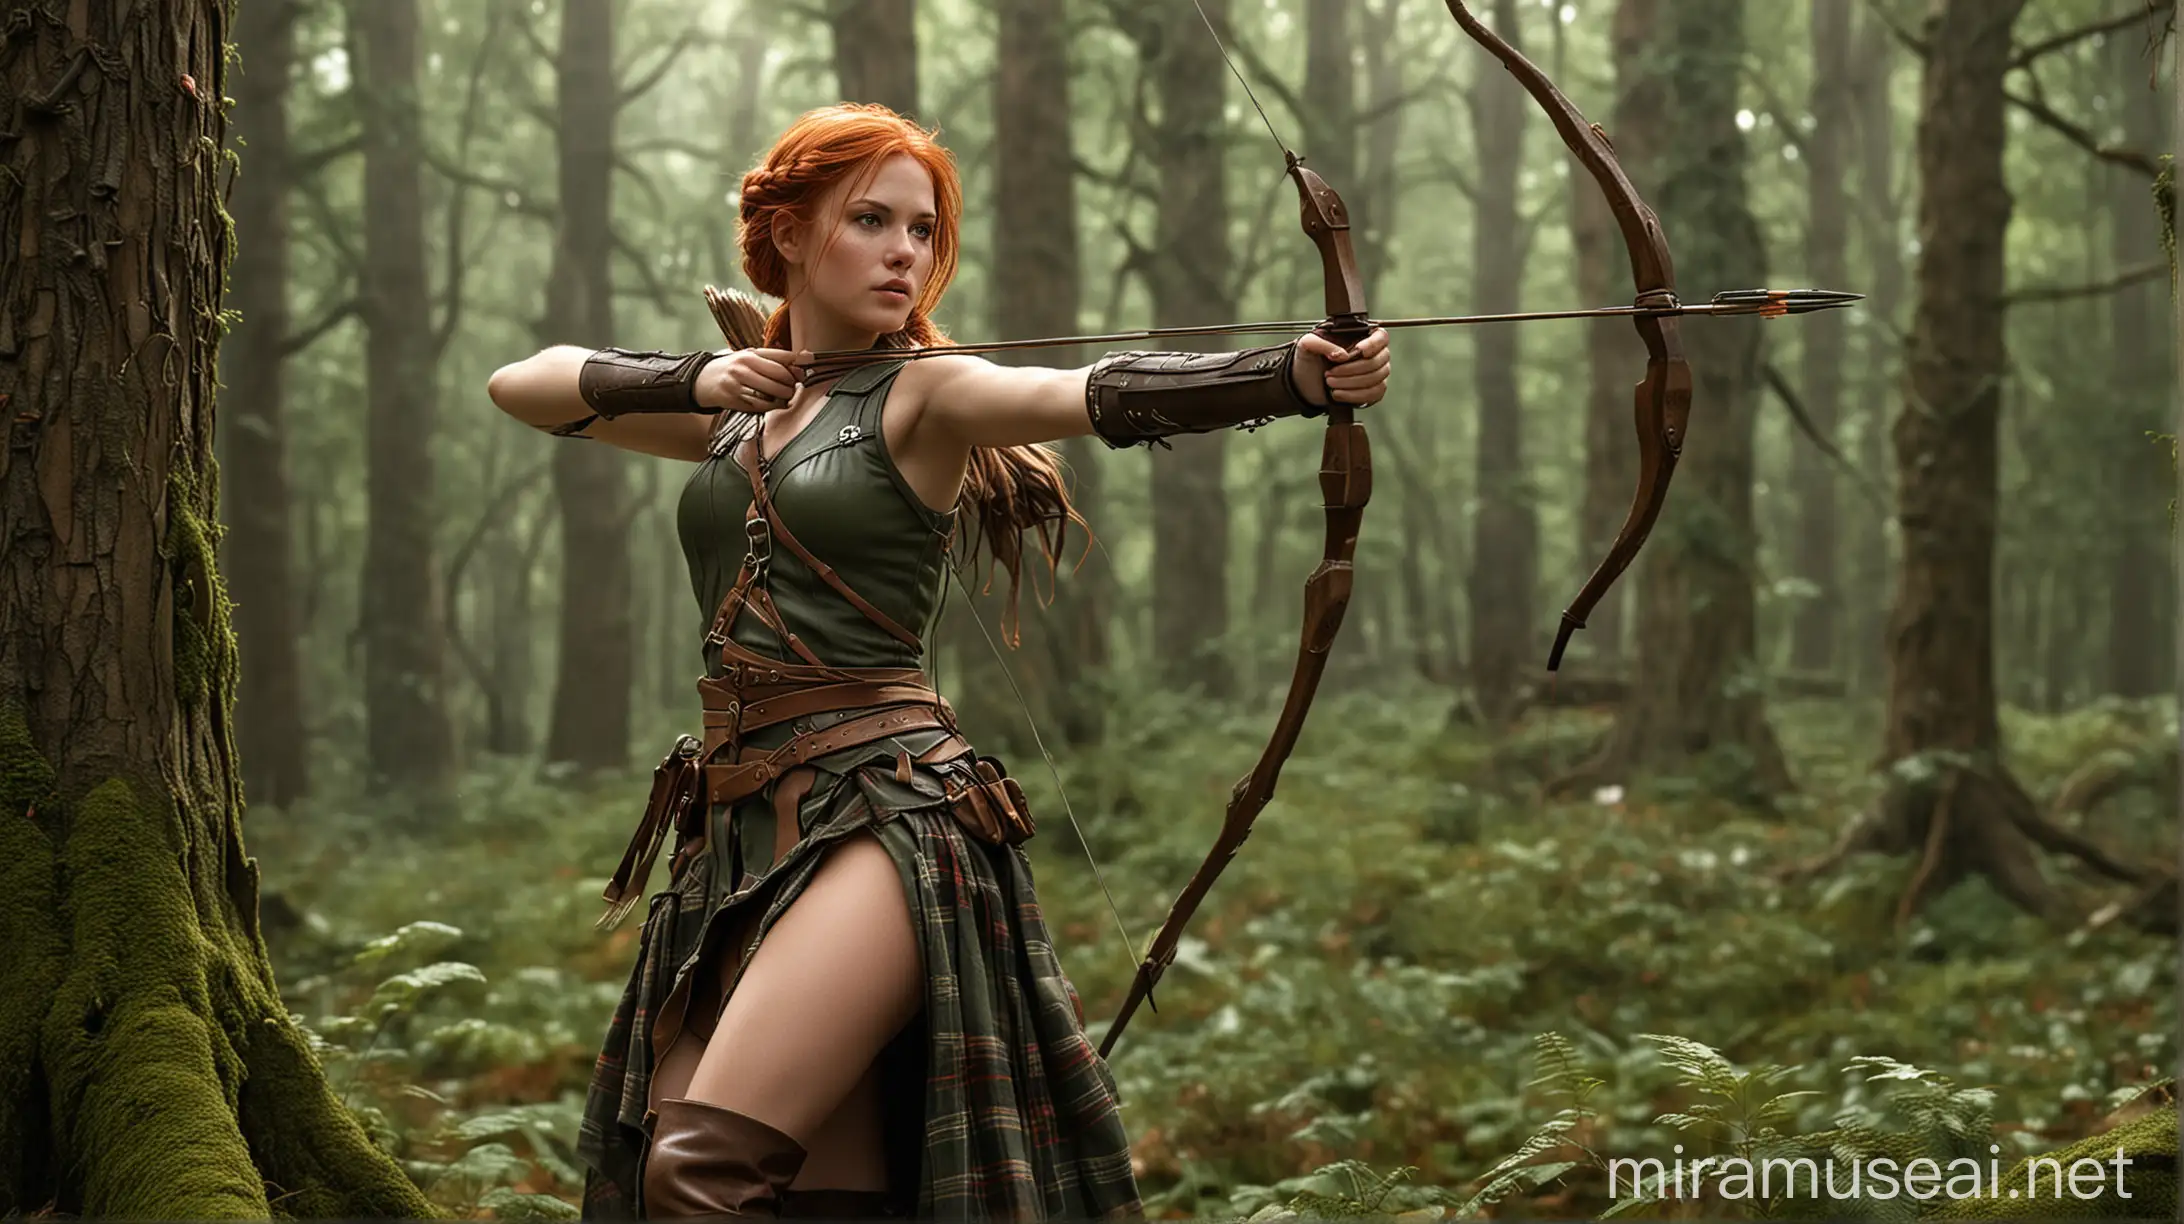 Render a highly realistic image set in a moody, primordial forest - towering trees with twisting branches, dense foliage evoking untamed wilderness, and dappled lighting filtering through creating an otherworldly atmosphere.
Within this enchanted forest scene, include a red-haired Caucasian archer woman with long, straight fiery red hair flowing freely down her back with intricate braids woven throughout. She has striking features - piercing green eyes, a strong defined jawline, full lips set in determination, fair skin with a warm rosy tone and freckles across her nose and cheeks.
Dress her in a sleeveless tan leather tunic cinched with a belt, arm bracers, weathered brown breeches tucked into knee-high boots, with a quiver of arrows strapped across her back. Pose her in a shooting stance, left arm extended holding a longbow horizontally, right hand drawing the bowstring back with an arrow nocked and aimed at her target.
Her target should be an upscale green designer purse atop a tan dog bed nestled between tree roots. Directly behind, a brown/green upright vacuum leaning on the tree trunk.
Also incorporate a closed, leather-bound antique book on the forest floor, aged pages ruffling slightly. Optional elements: brass lantern, steaming mug, plaid wool blanket over a mossy log.
Render all elements together cohesively in one finely detailed mystical forest setting capturing the archer, curated inventory and enchanted atmosphere.